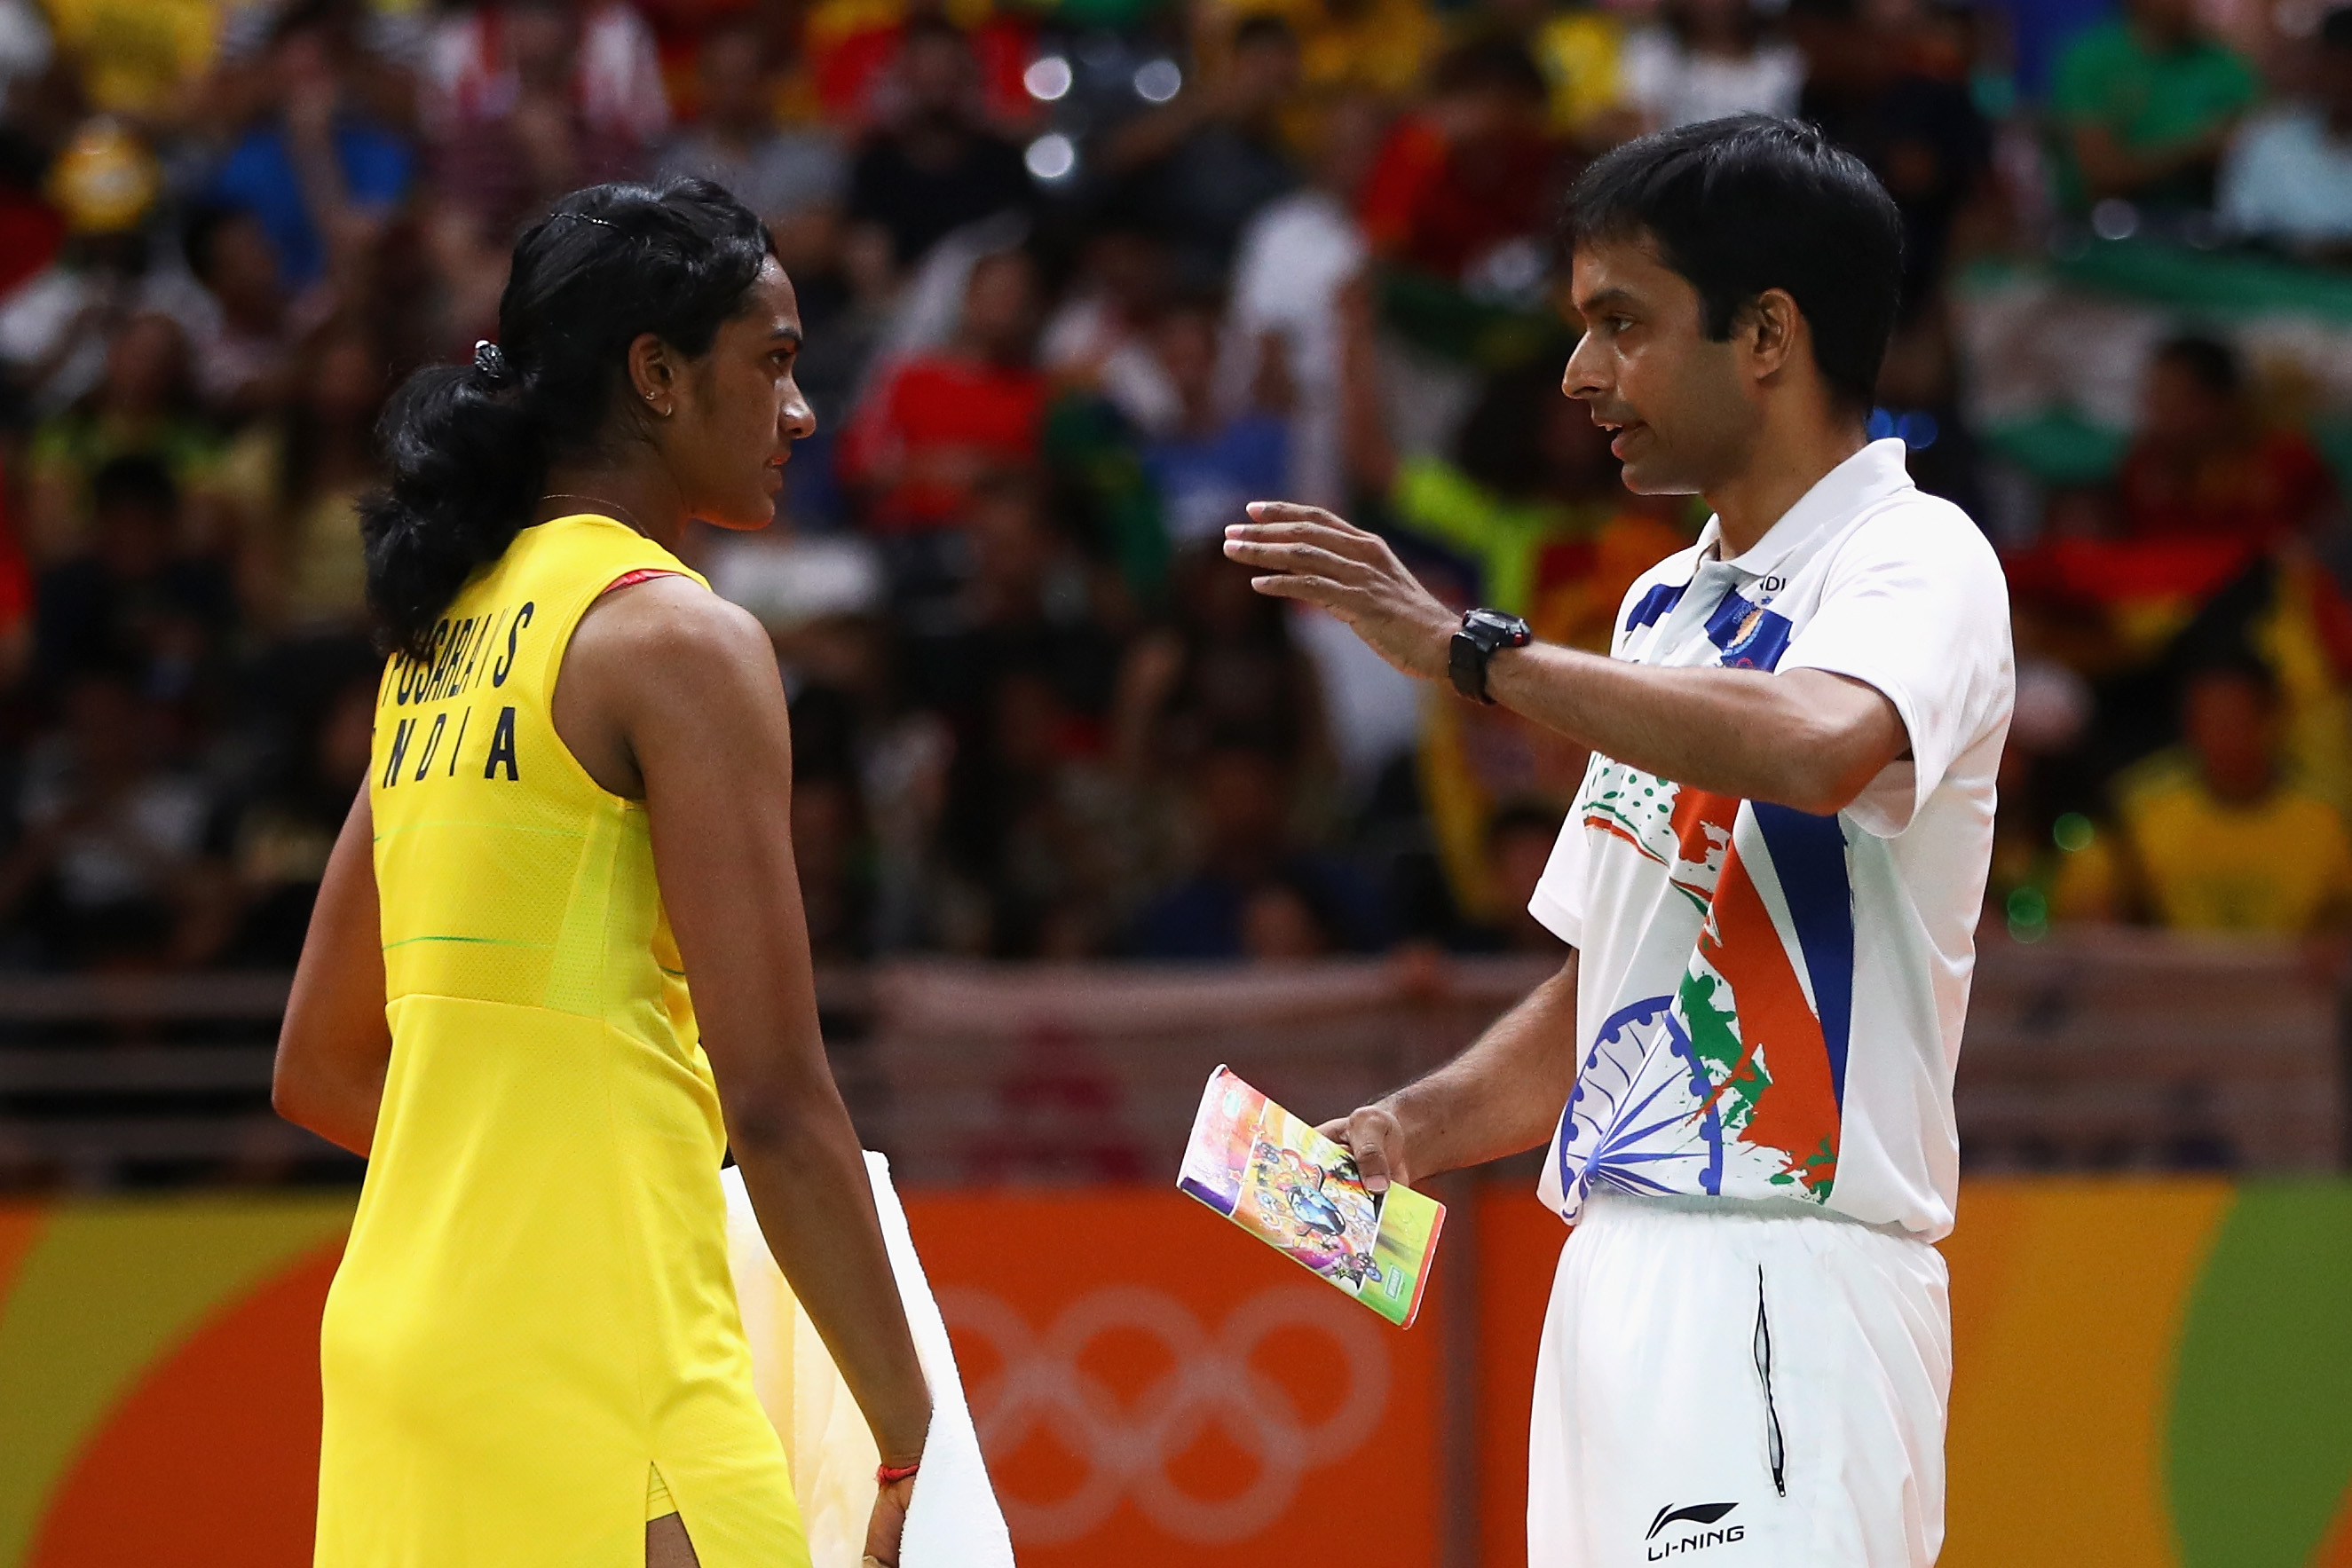 Will win better medals at Tokyo Olympics, says Pullela Gopichand